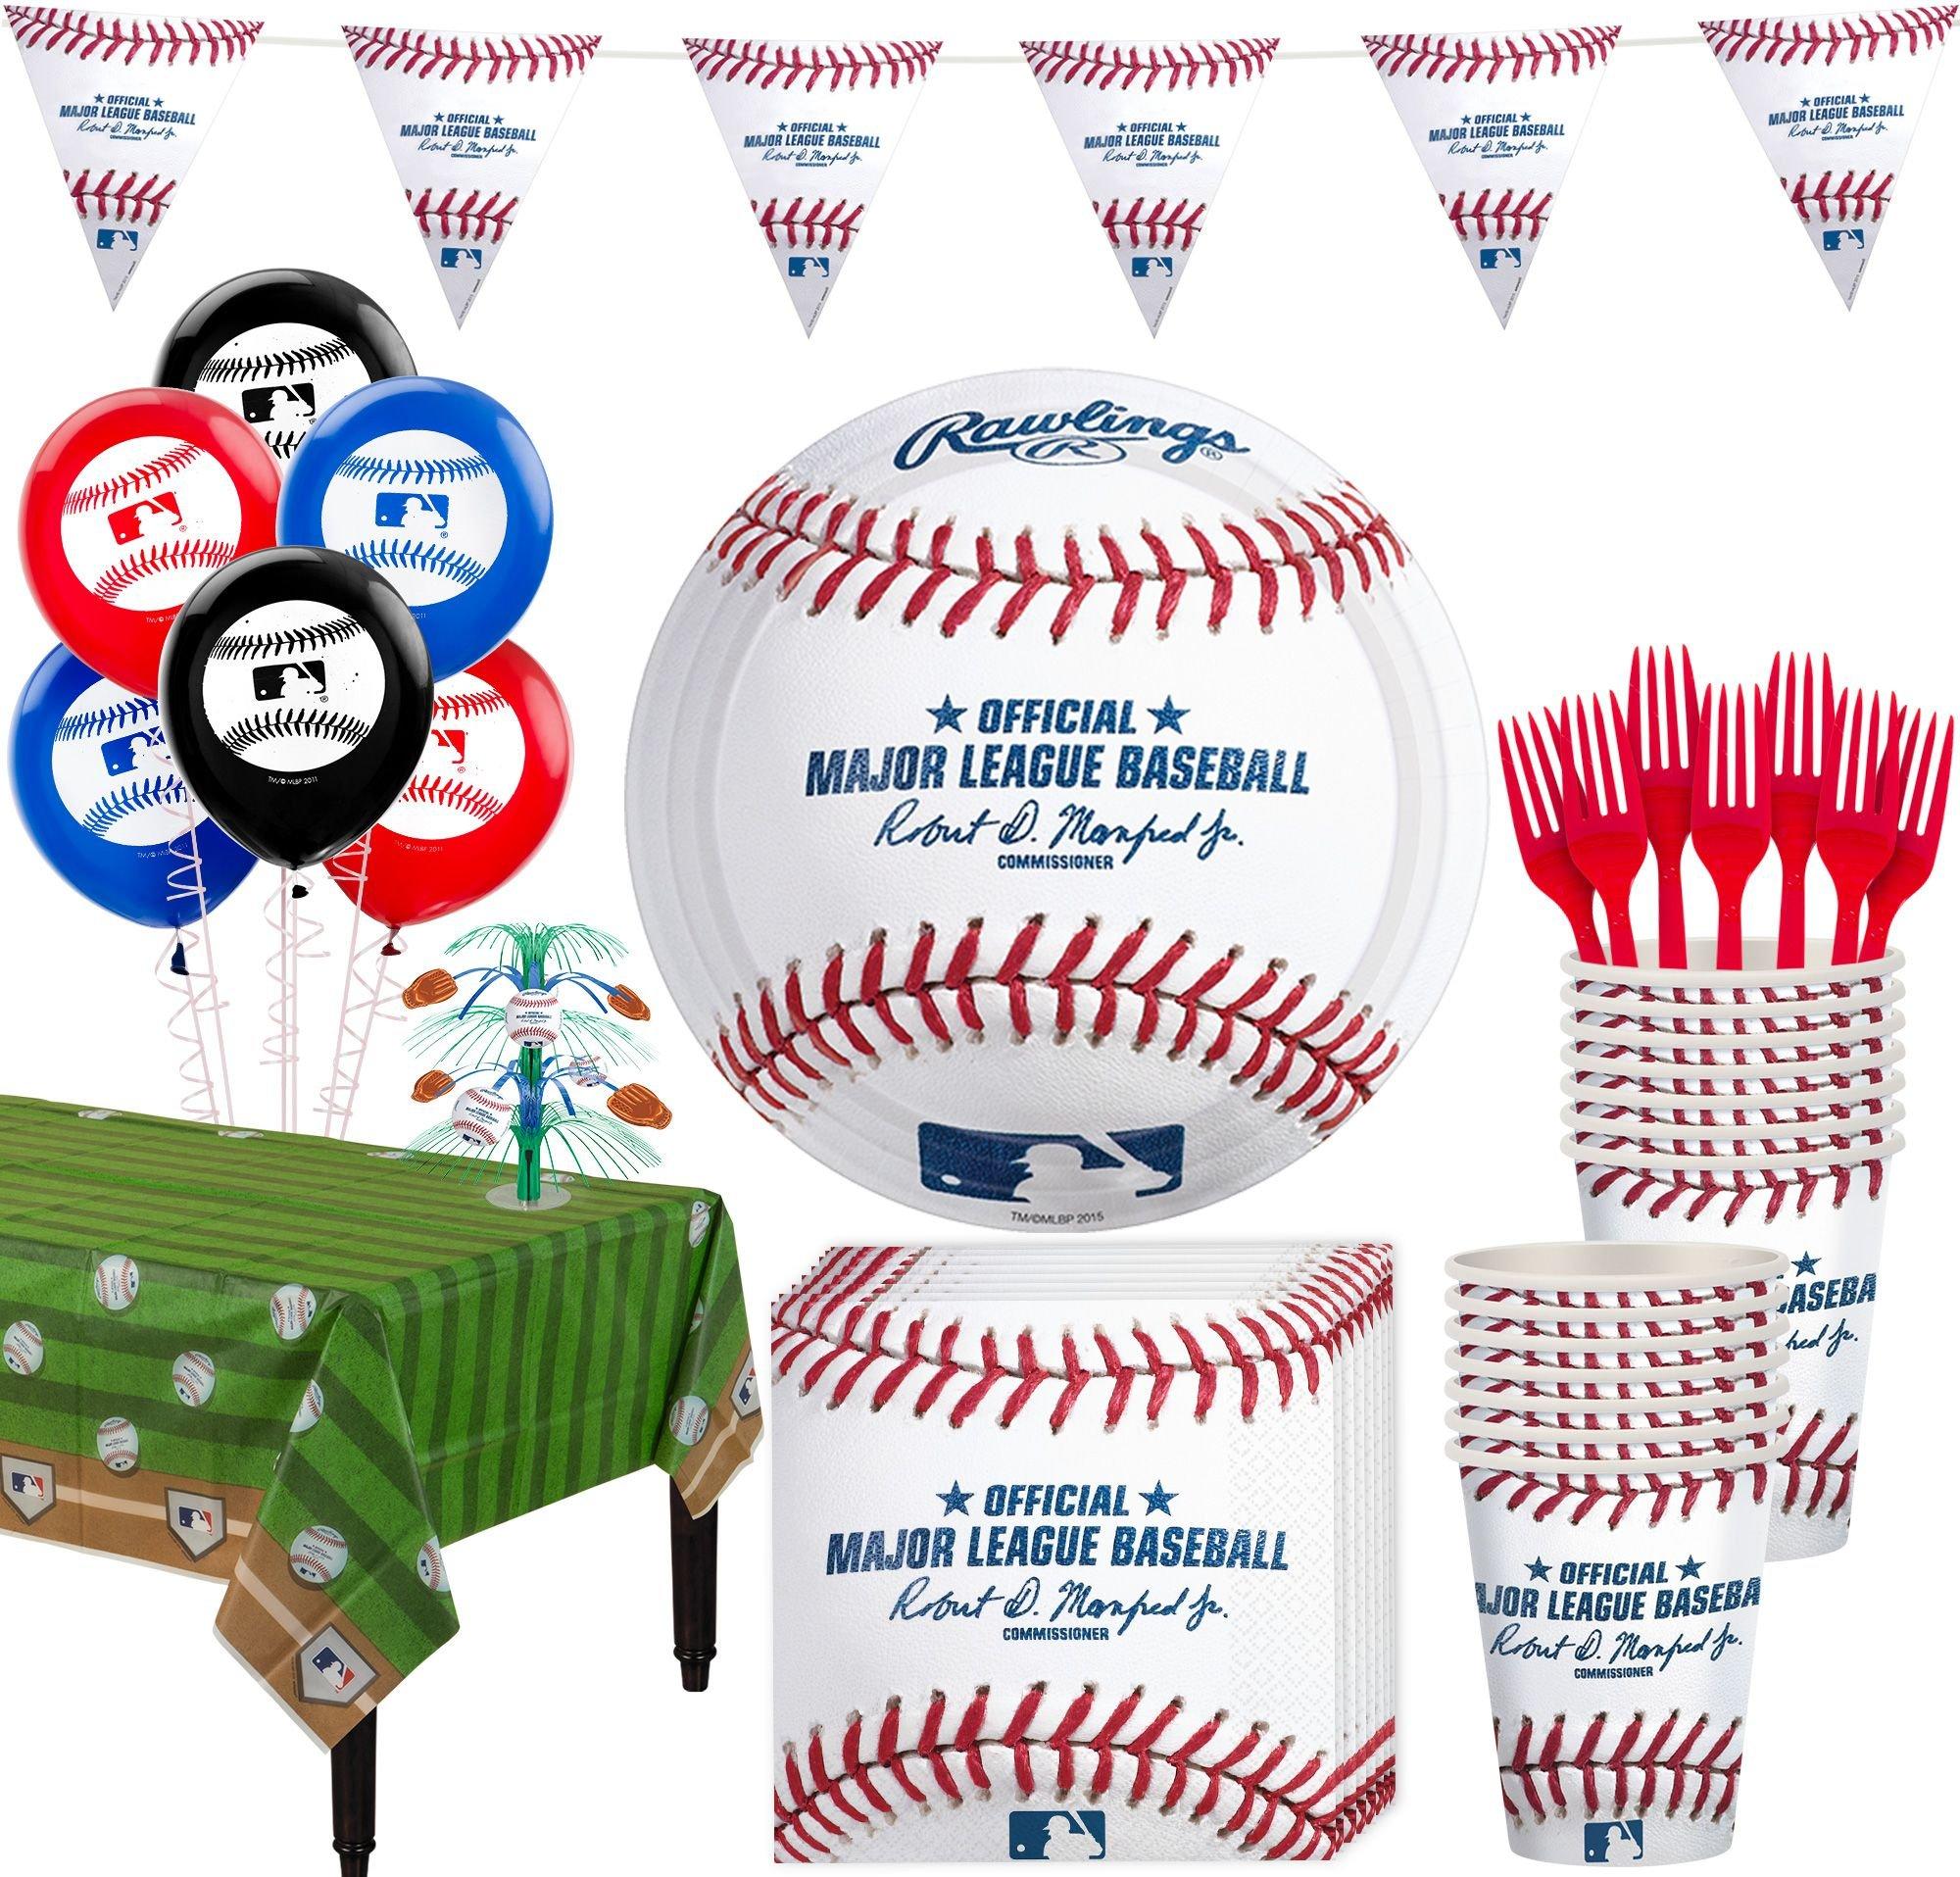 Super St. Louis Cardinals Party Kit for 36 Guests - Size - Party Kits